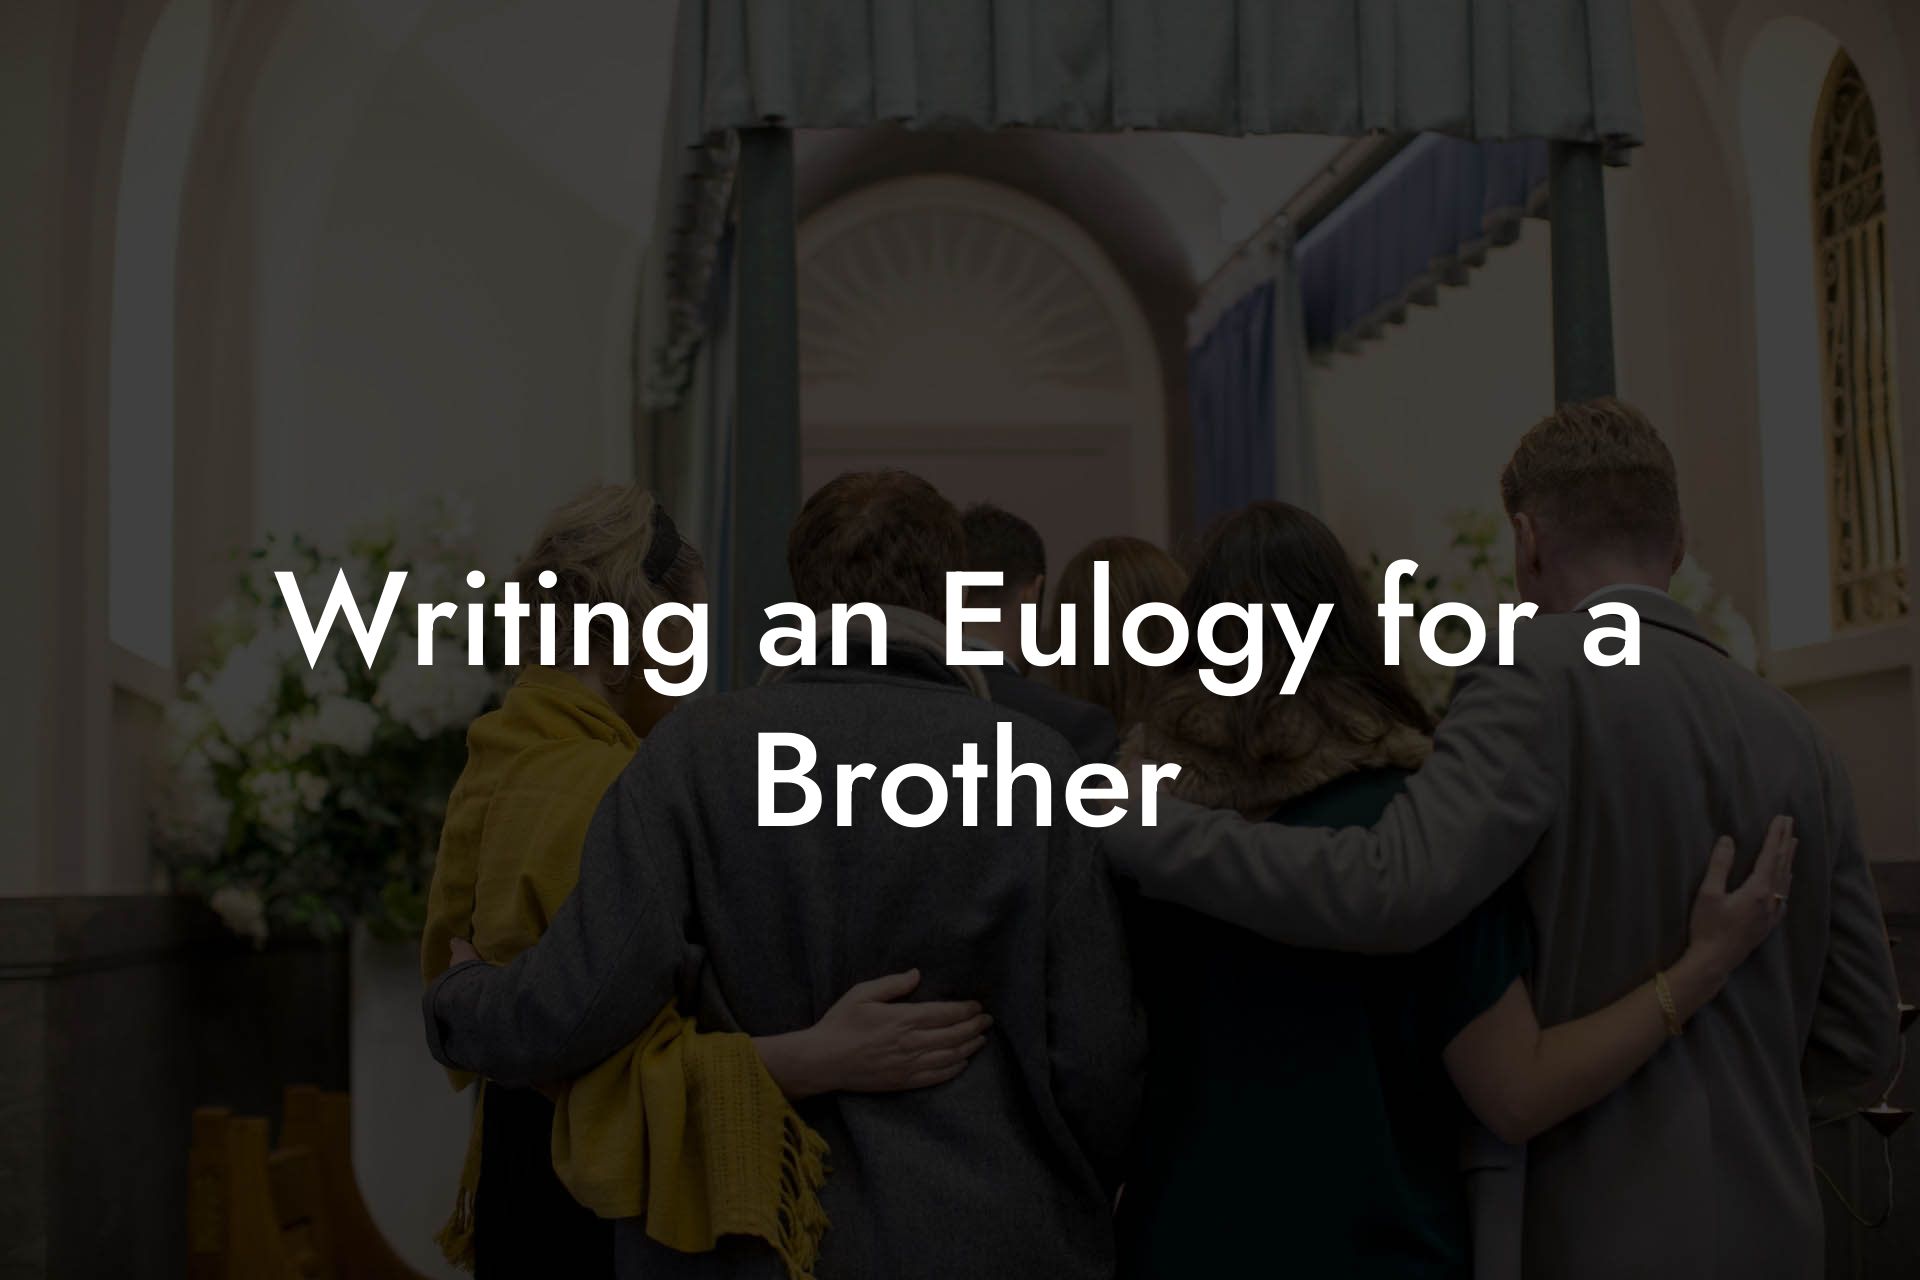 Writing an Eulogy for a Brother